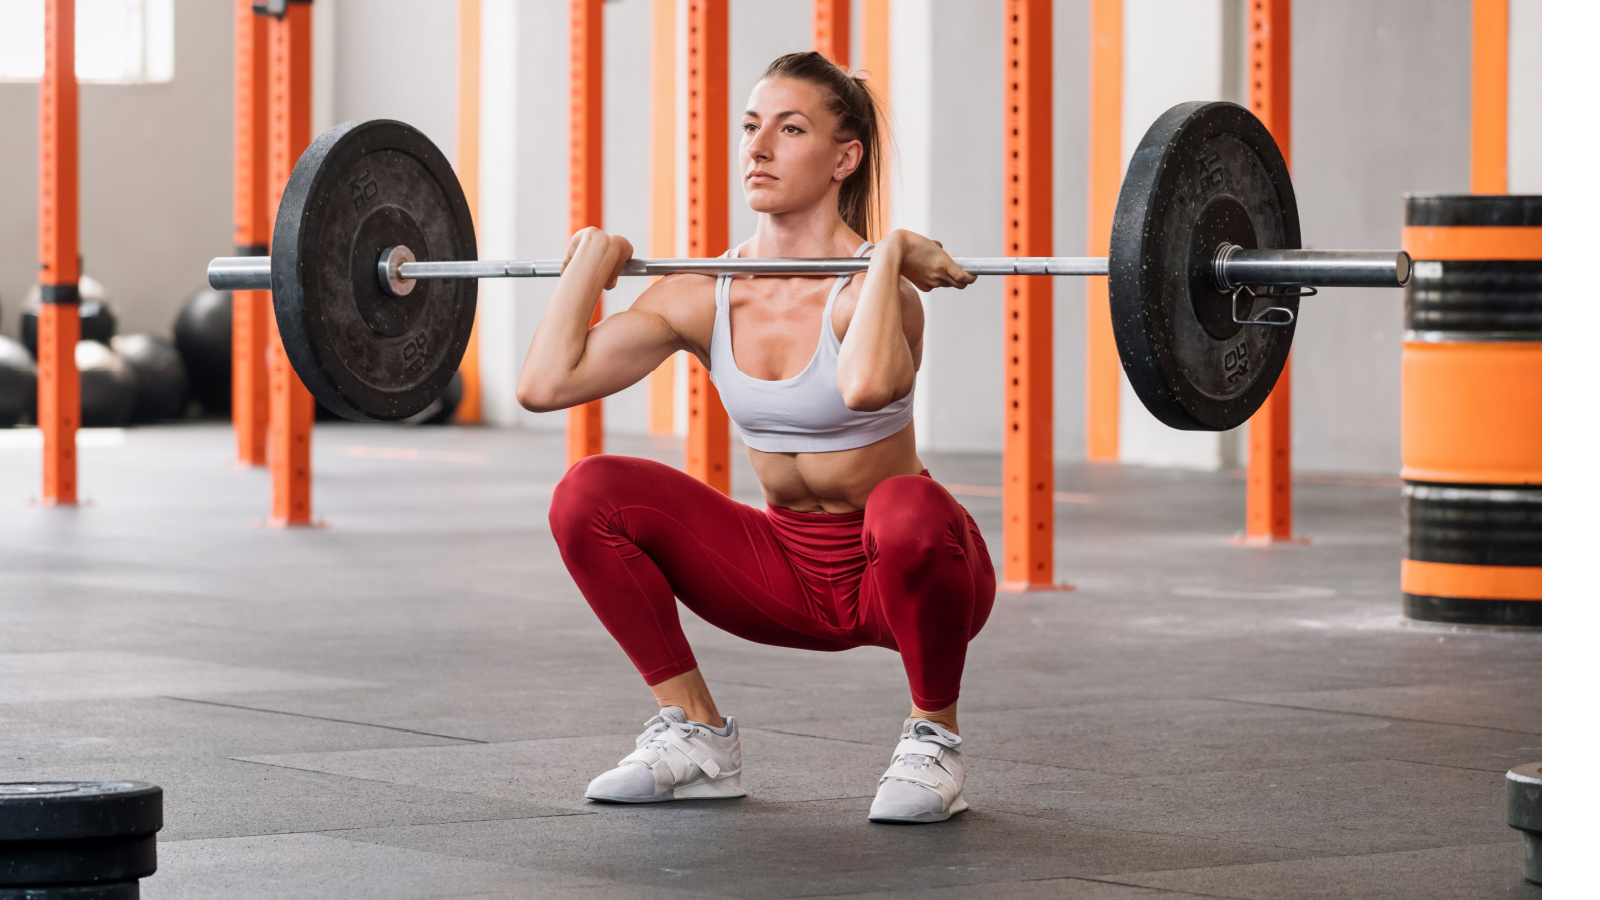 The 9 Best Squat Variations for Size, Strength, and More - Breaking Muscle